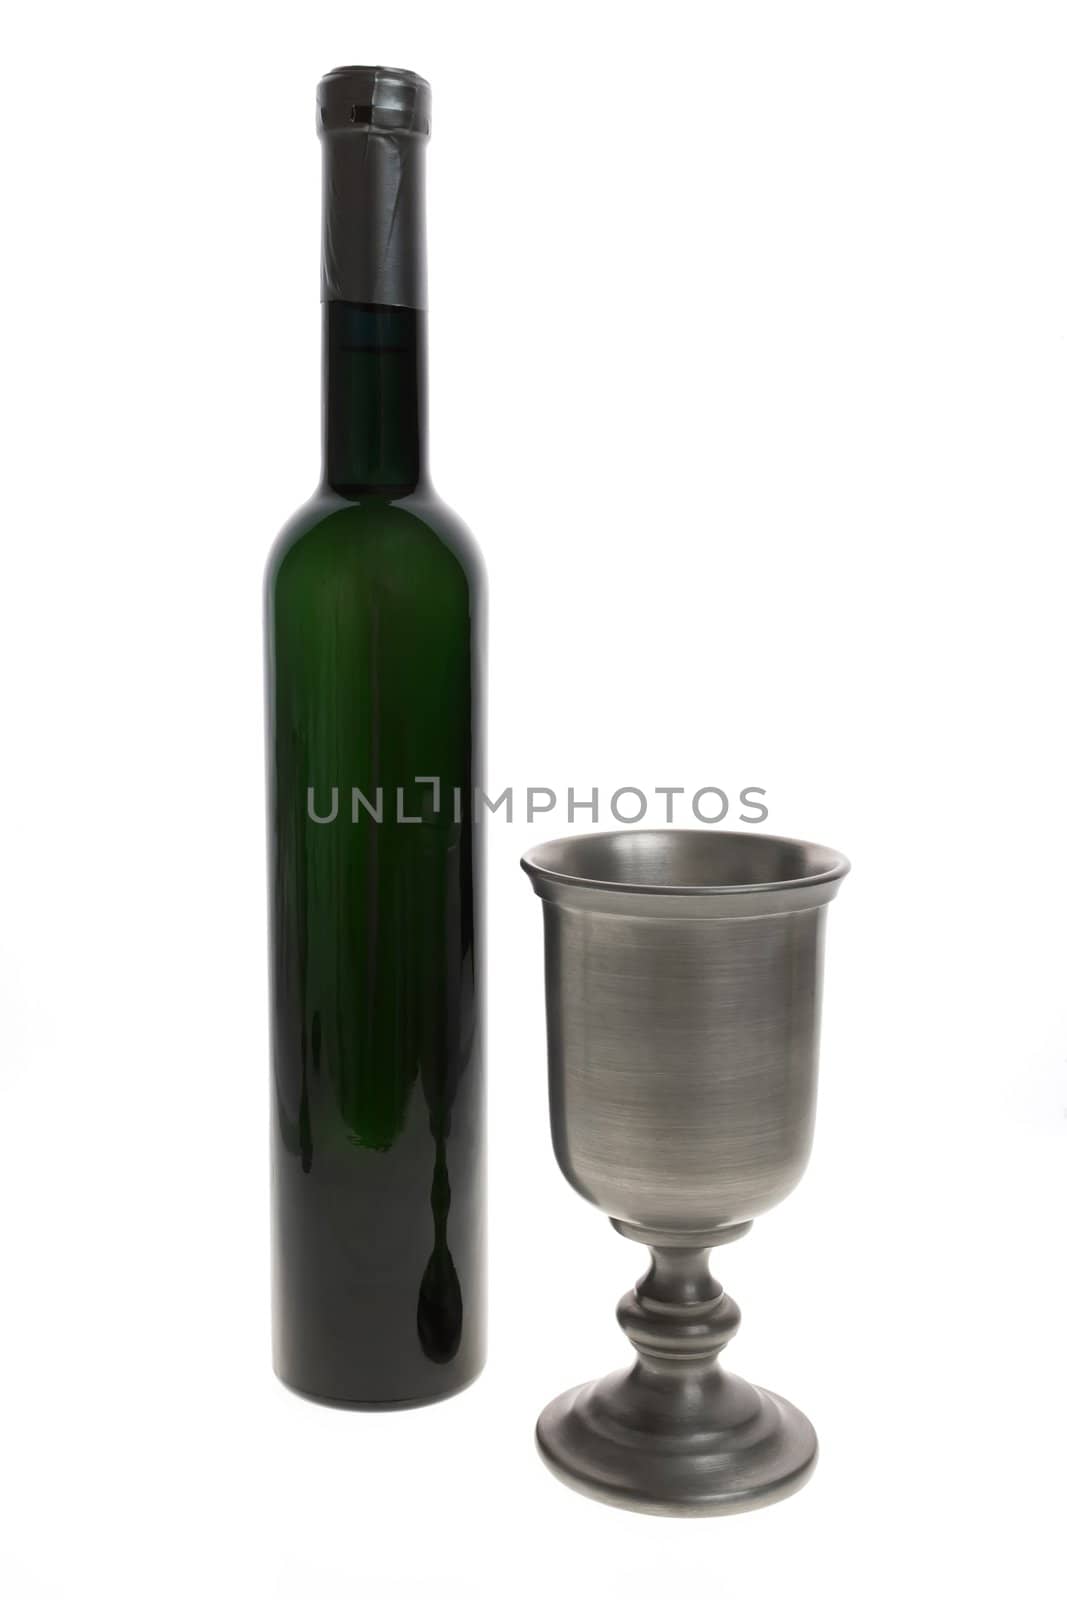 Wine cup and bottle by robertsz